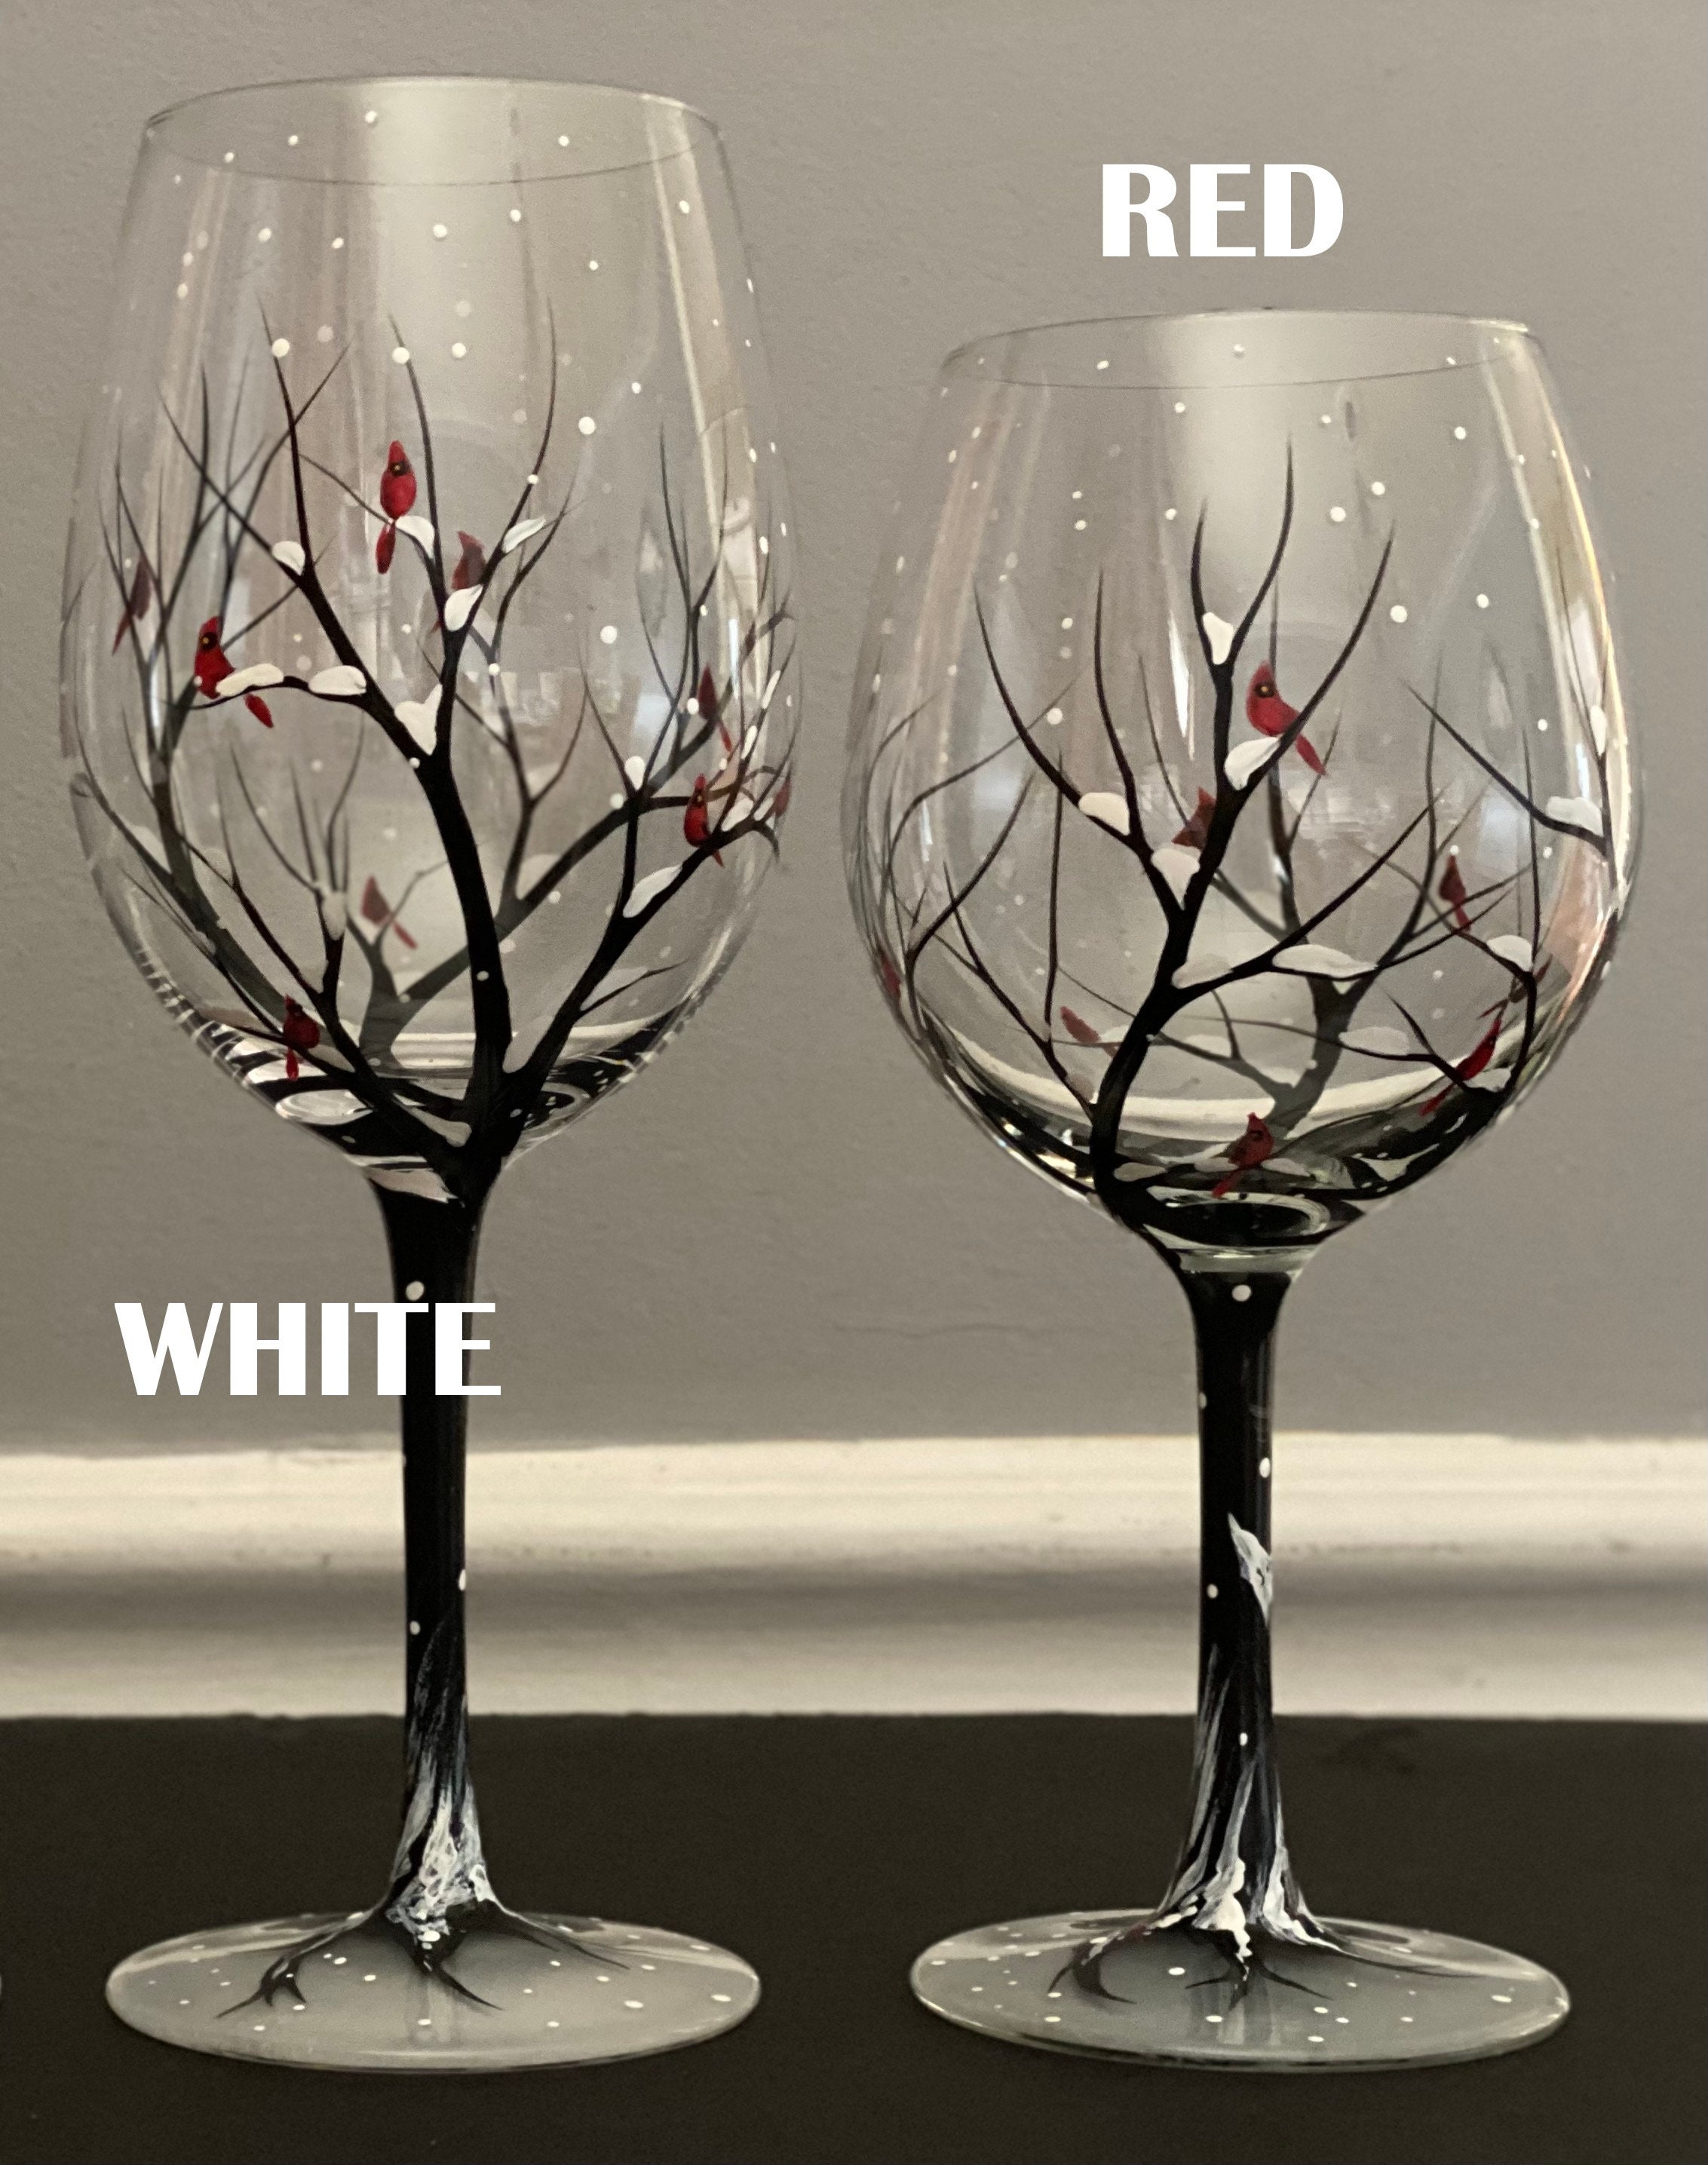 Hand Painted Wine Glass Colorful Four Seasons Tree Wine Glass Hand Painted  Colorful Tree Painted Glass 